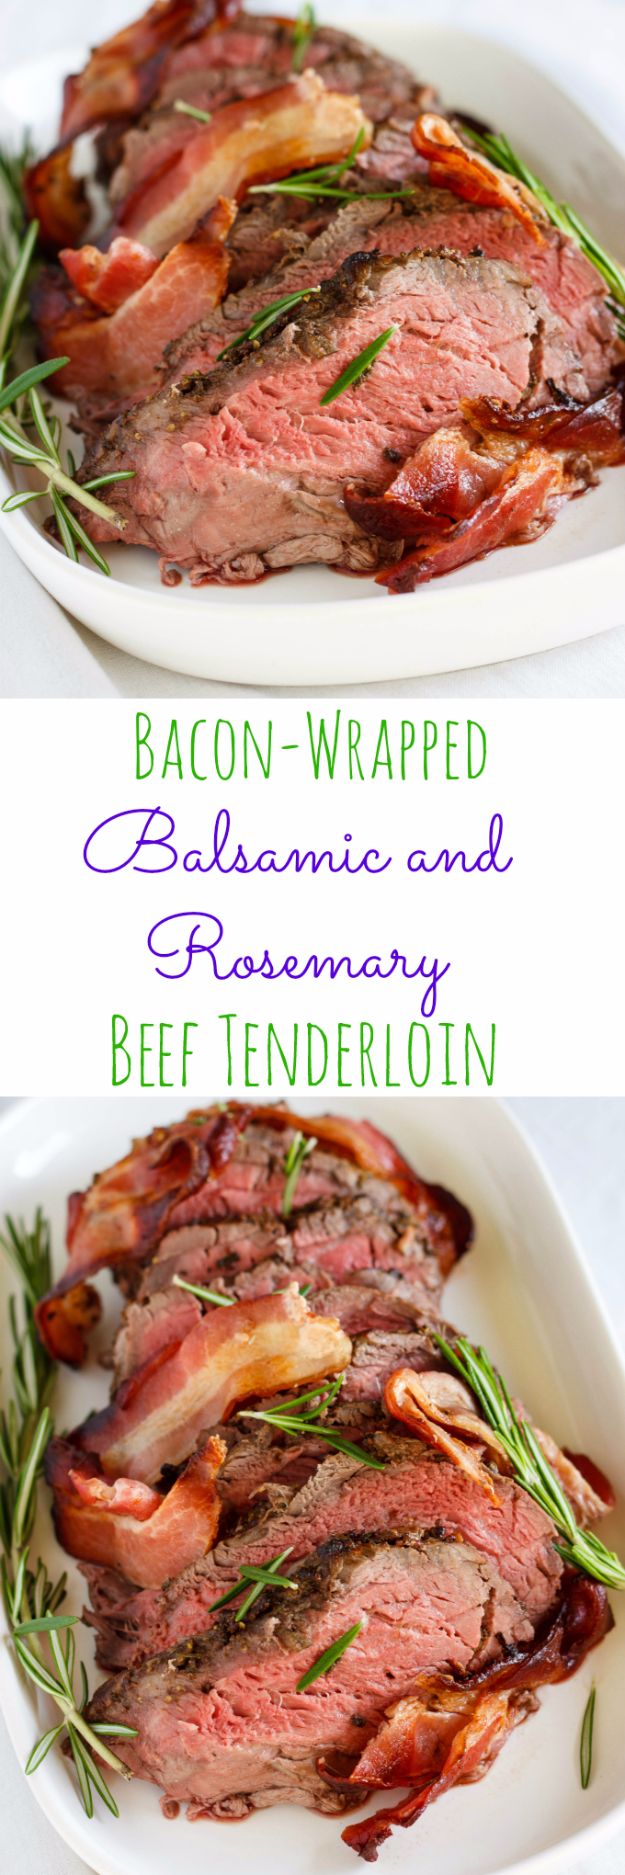 Best Easter Dinner Recipes - Bacon-Wrapped Balsamic and Rosemary Beef Tenderloin - Easy Recipe Ideas for Easter Dinners and Holiday Meals for Families - Side Dishes, Slow Cooker Recipe Tutorials, Main Courses, Traditional Meat, Vegetable and Dessert Ideas - Desserts, Pies, Cakes, Ham and Beef, Lamb - DIY Projects and Crafts by DIY JOY 